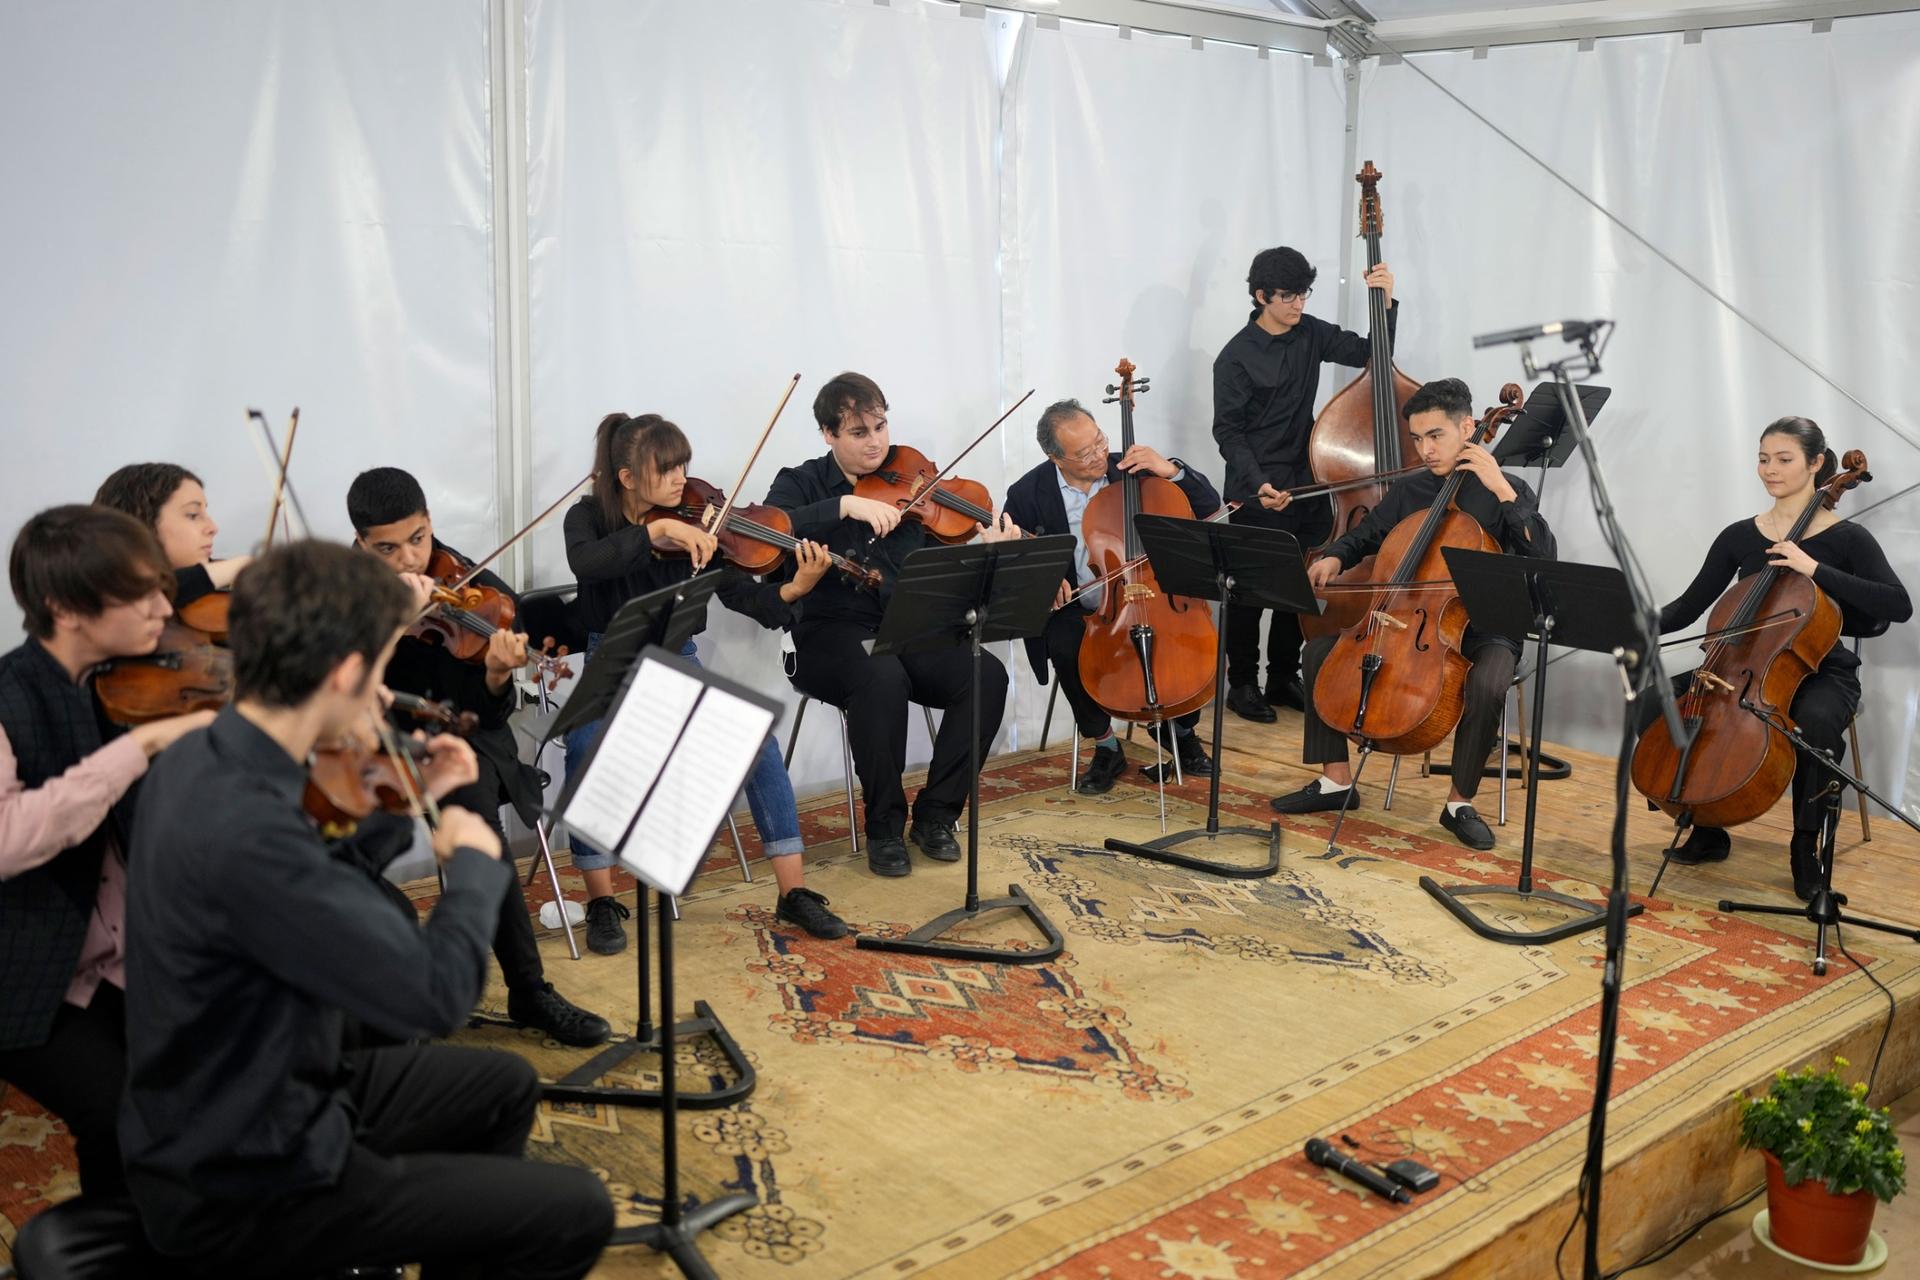 World renowned US cellist Yo-Yo Ma, 4th right, plays with Portuguese and Afghan music students at the Music School of the National Conservatory in Lisbon, Tuesday, March 29, 2022. 